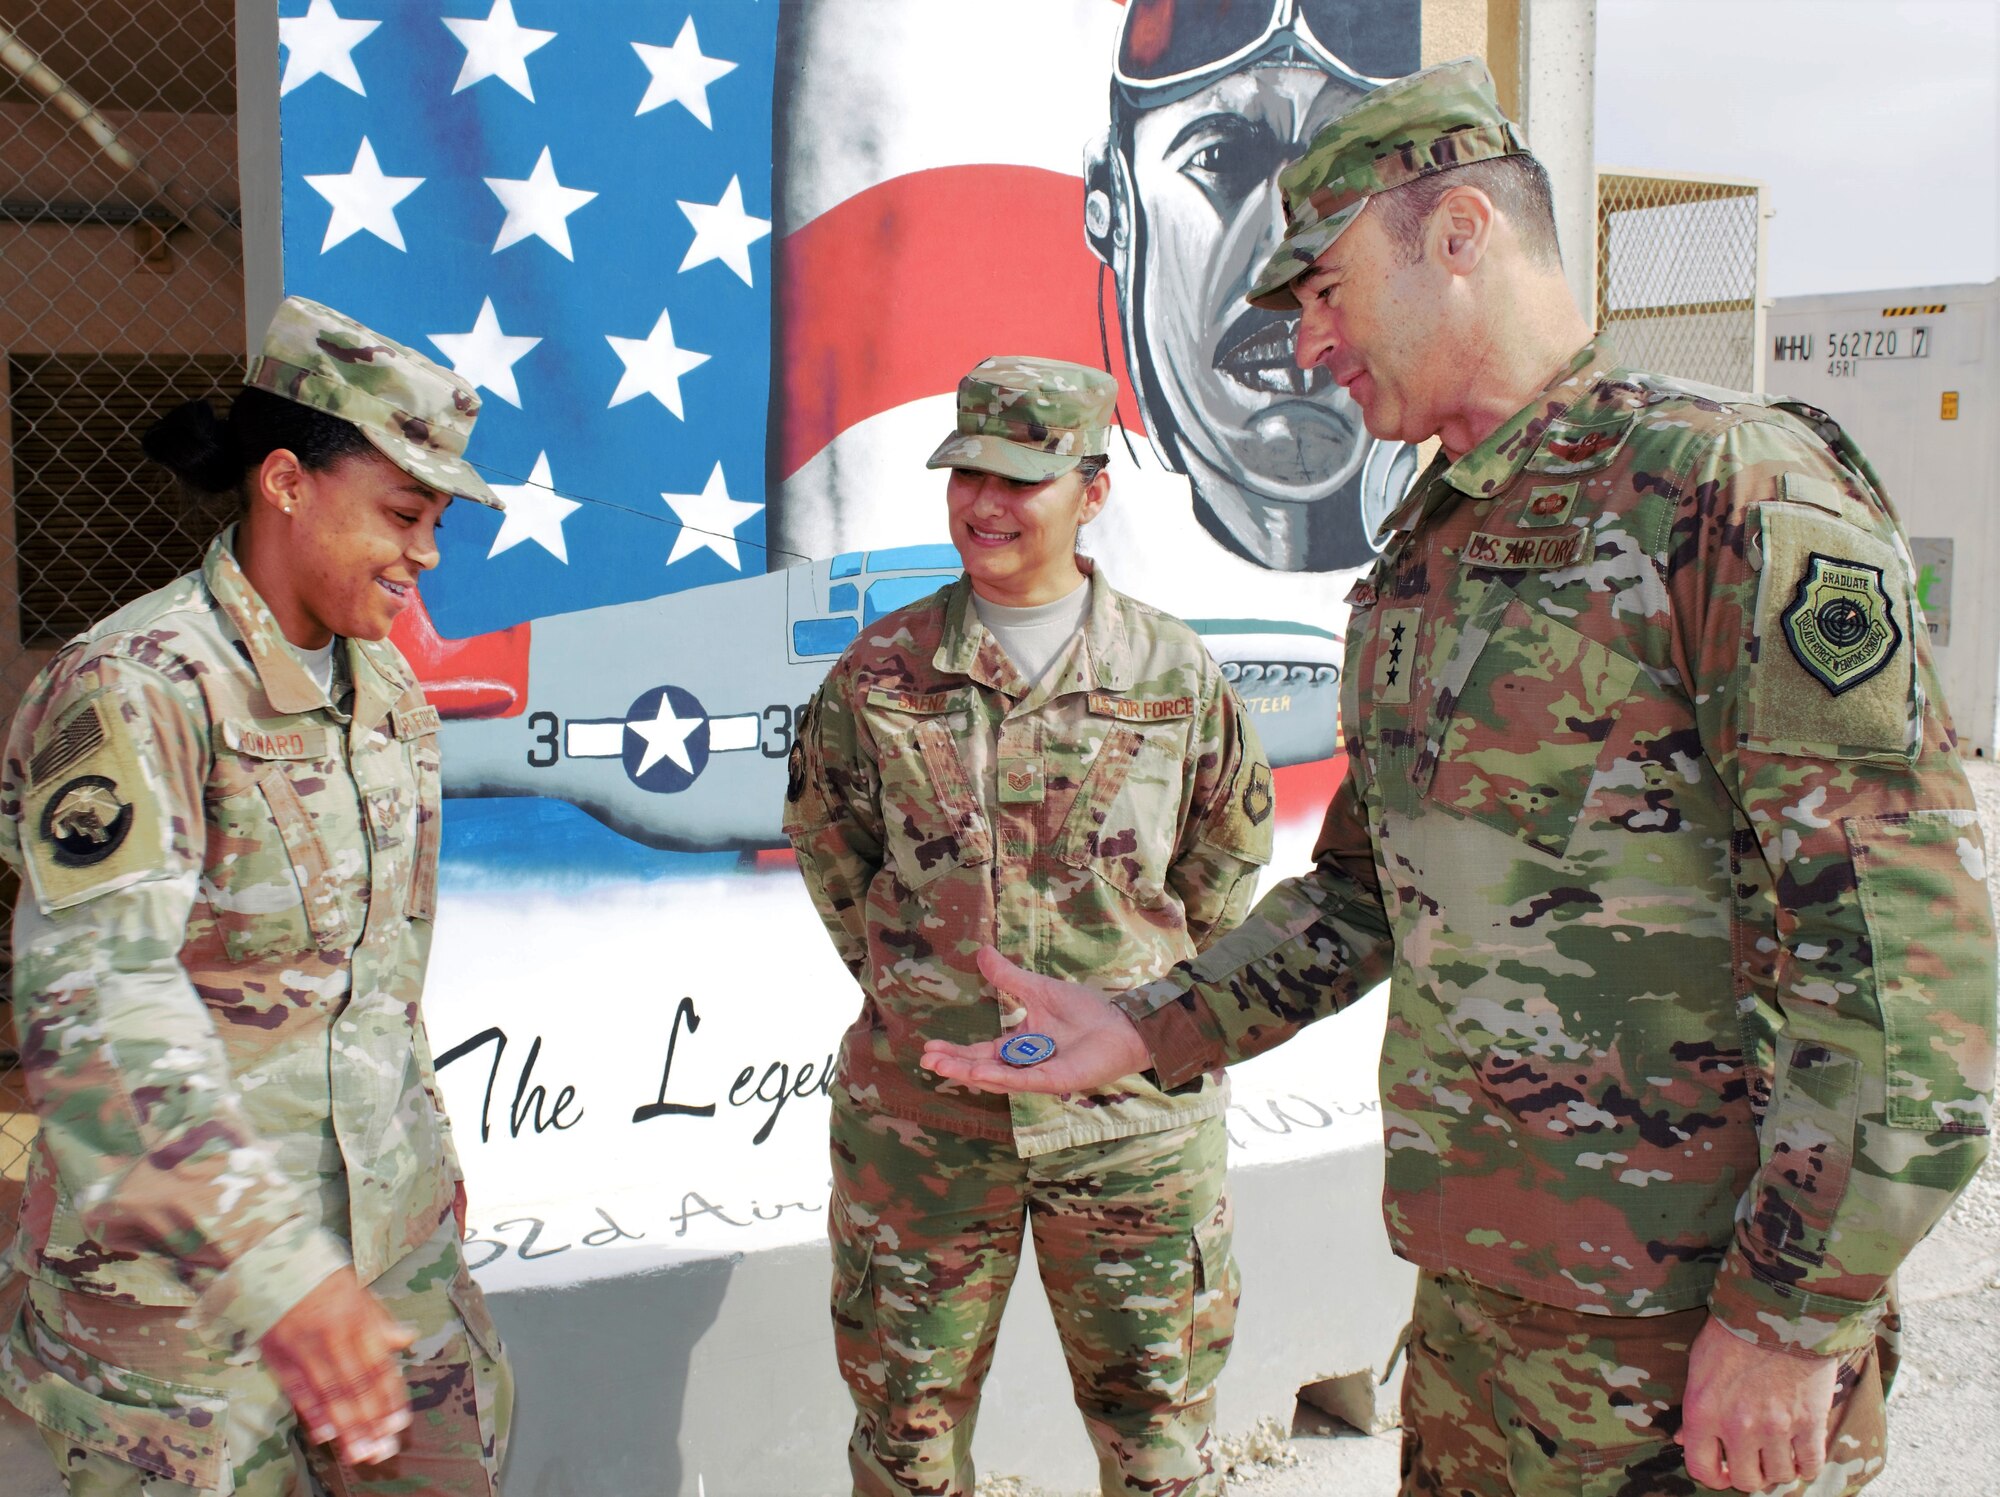 Lt. Gen. Joseph T. Guastella, U.S. Air Forces Central Command commander, presents a challenge coin to Tech. Sgt. Antinita Howard, 332d Expeditionary Force Support Squadron storeroom non-commissioned officer in charge, Dec. 4, 2018.  During his visit, Guastella recognized several Airmen for exceptional service in support of U.S. Air Force Central Command operations.  Commanders often present challenge coins in recognition of special achievements.  Howard is from Beale Air Force Base, Calif.  (U.S. Air Force photo by Maj. John T. Stamm)